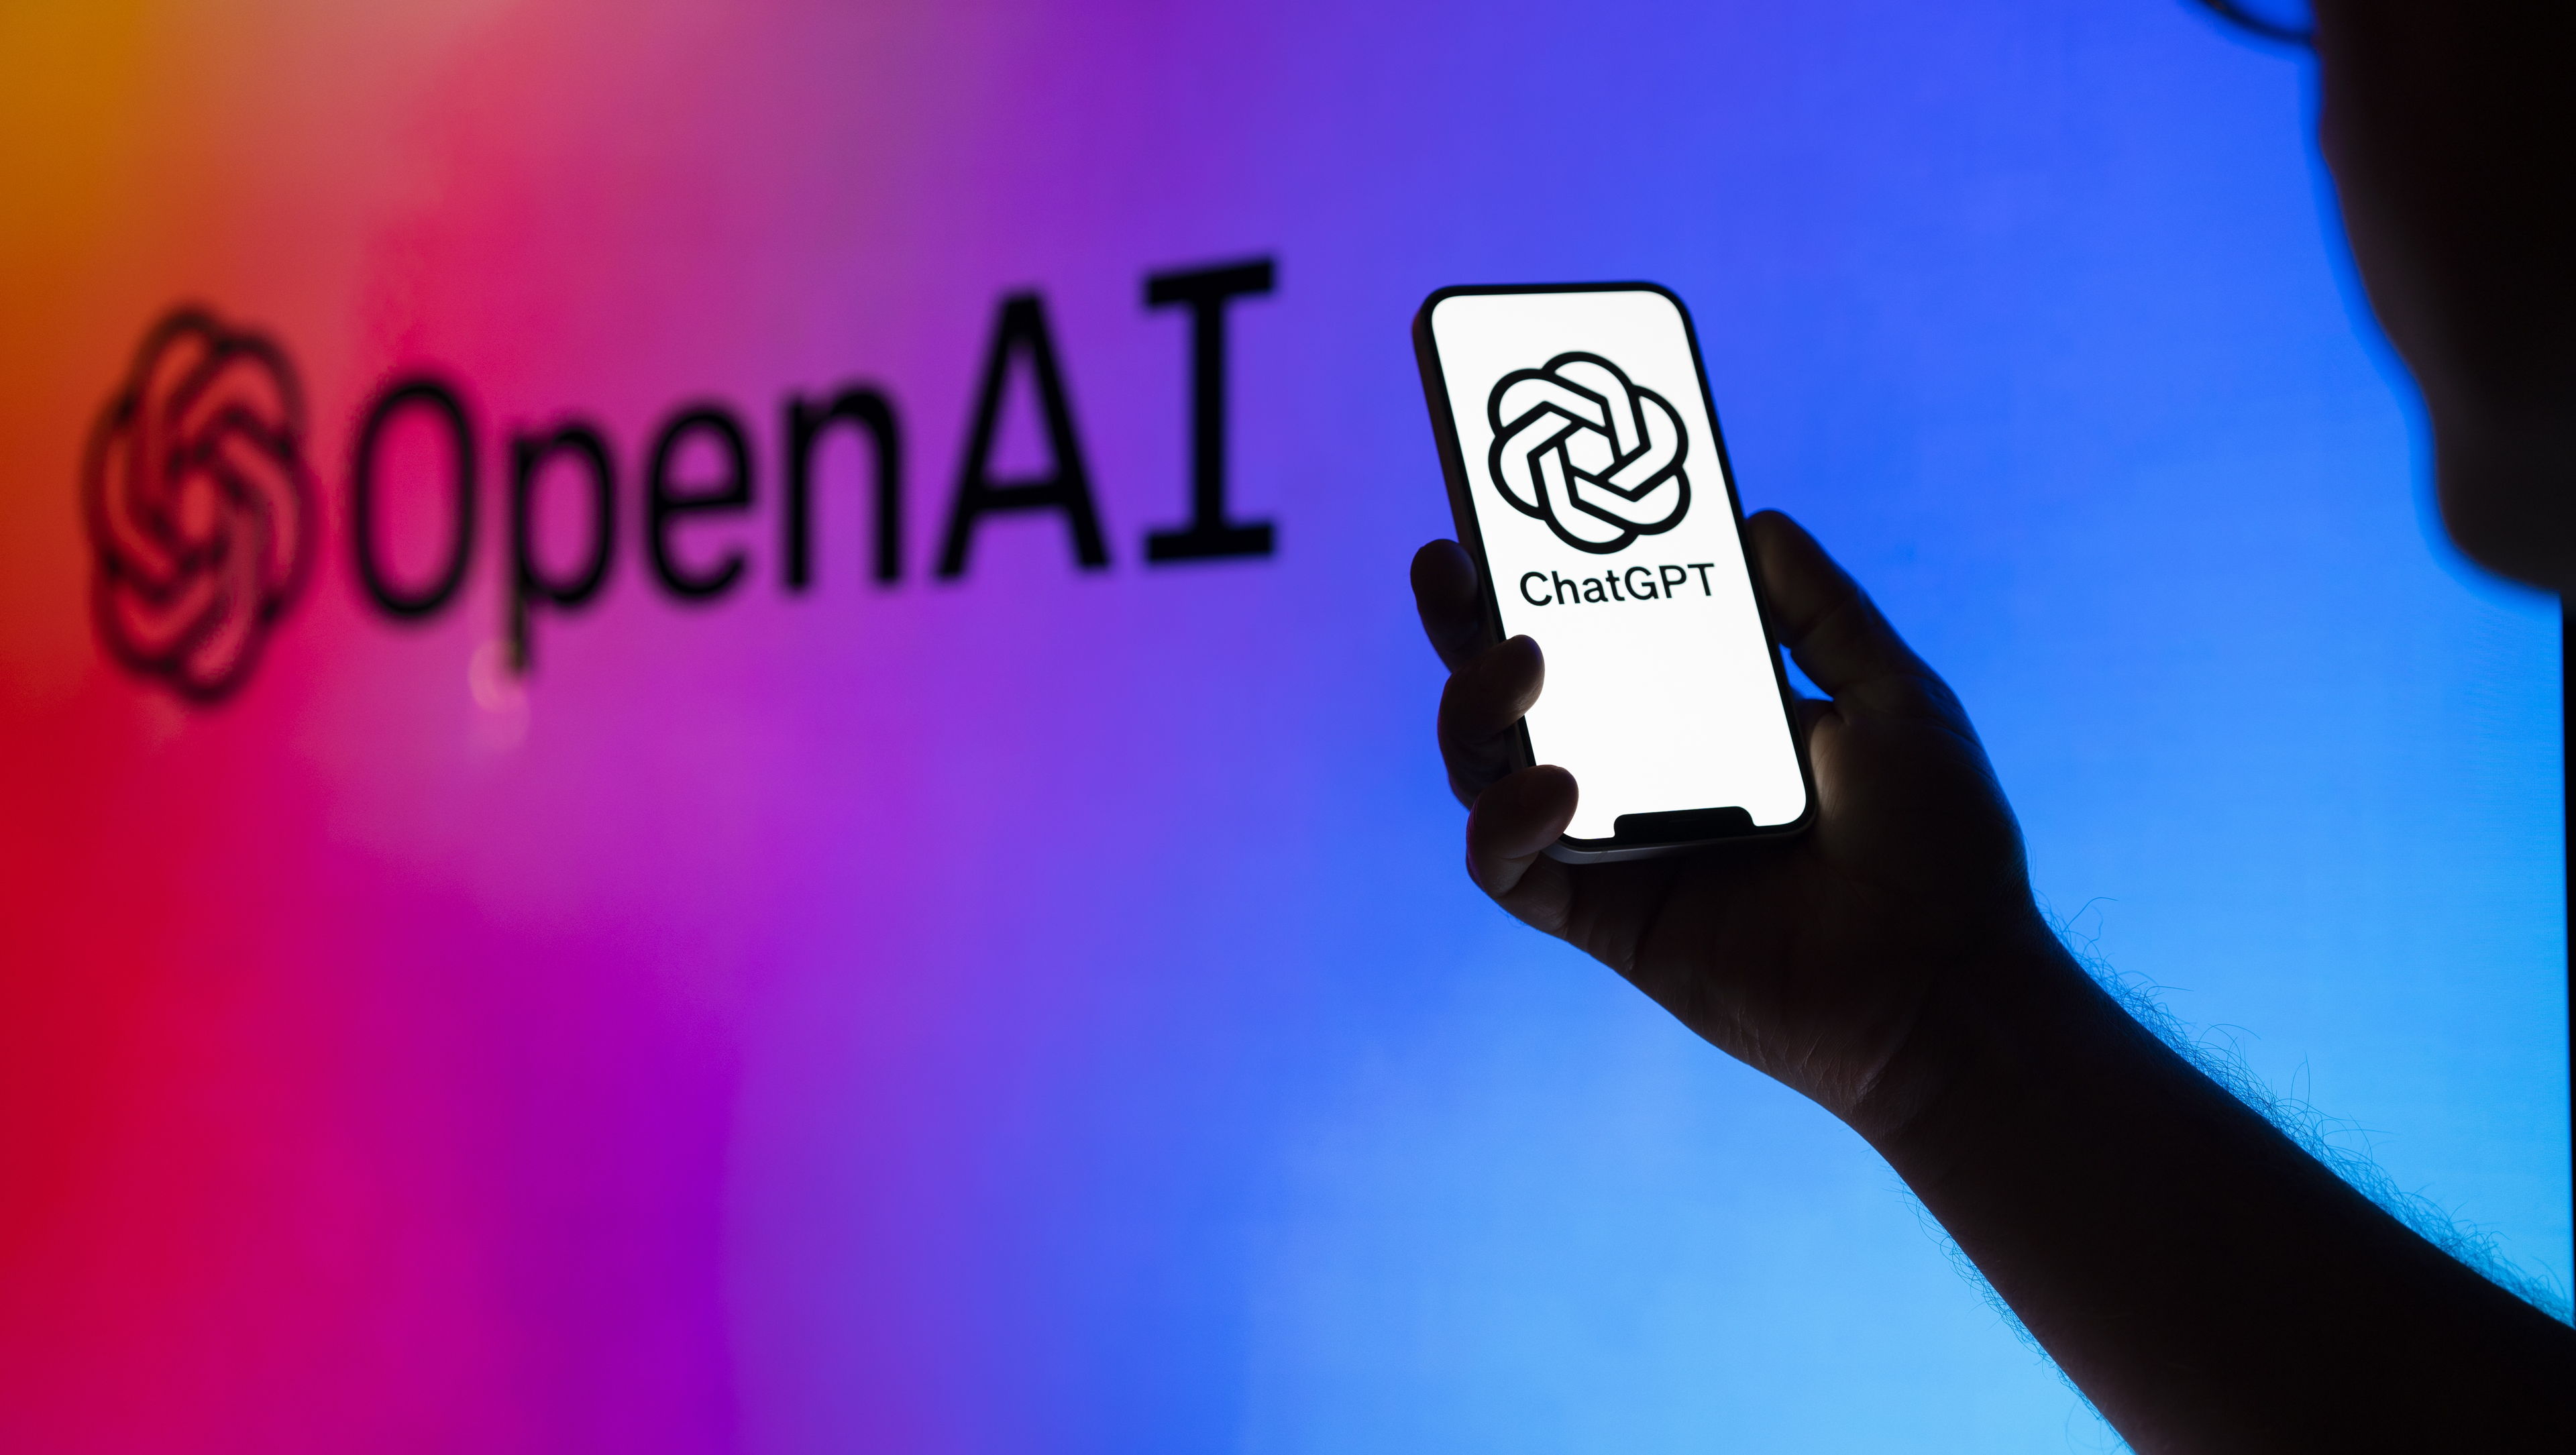 New version of OpenAI's ChatGPT allows users to have conversations with the system